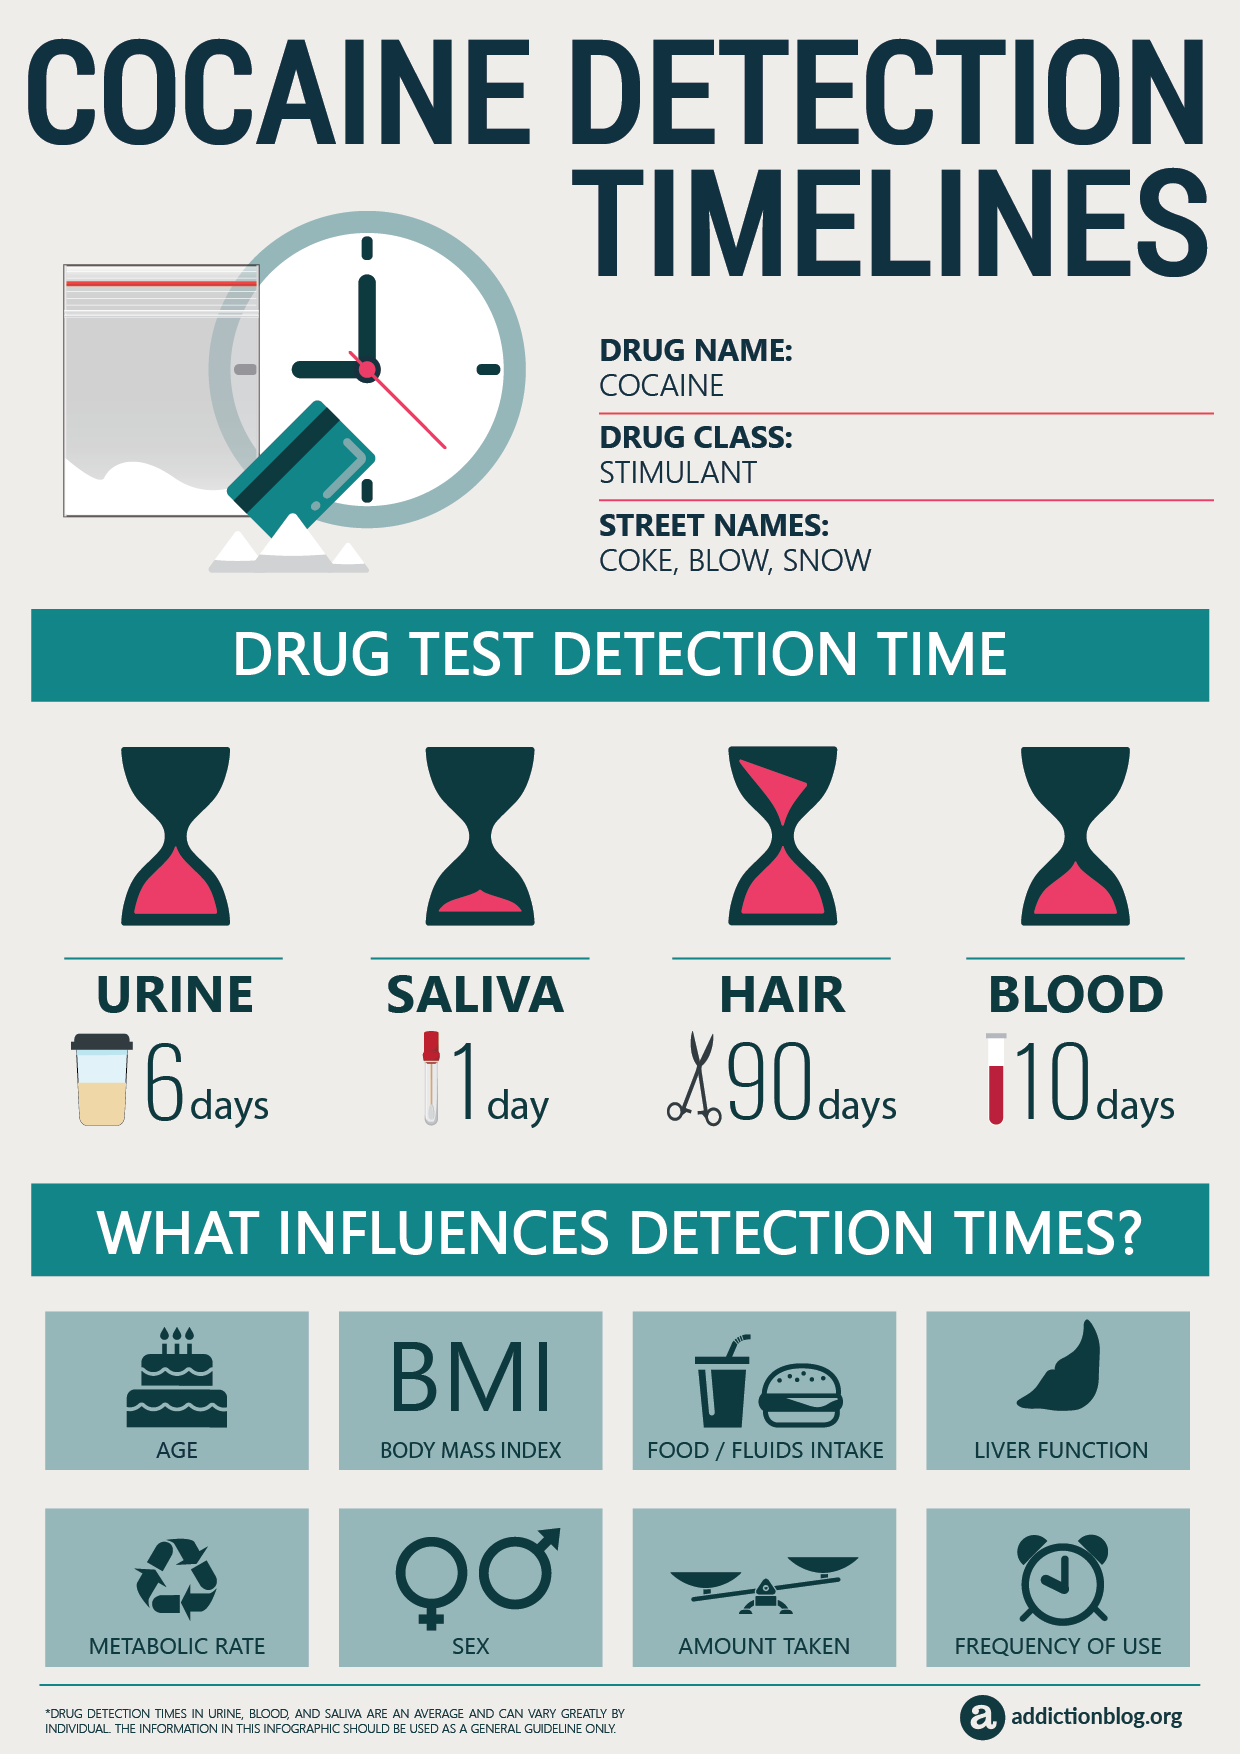 Cocaine Detection Timelines [INFOGRAPHIC]